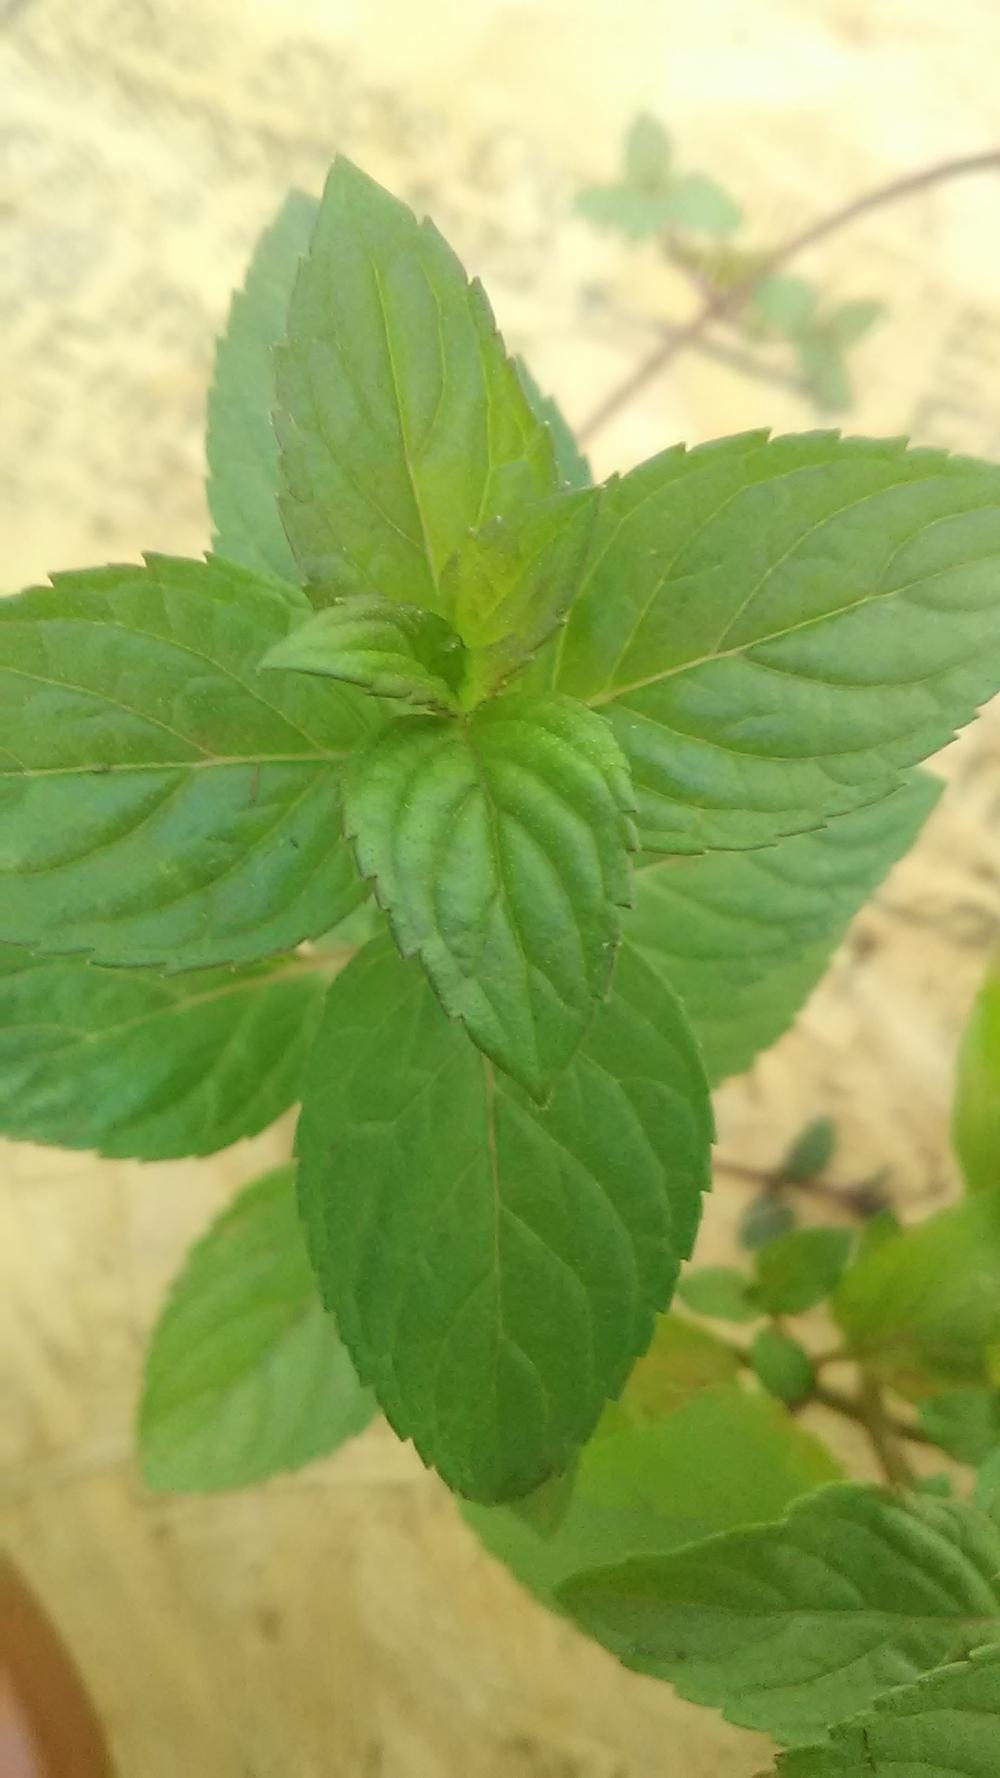 Photo of Chocolate Mint (Mentha x piperita 'Chocolate') uploaded by alex1992ccc